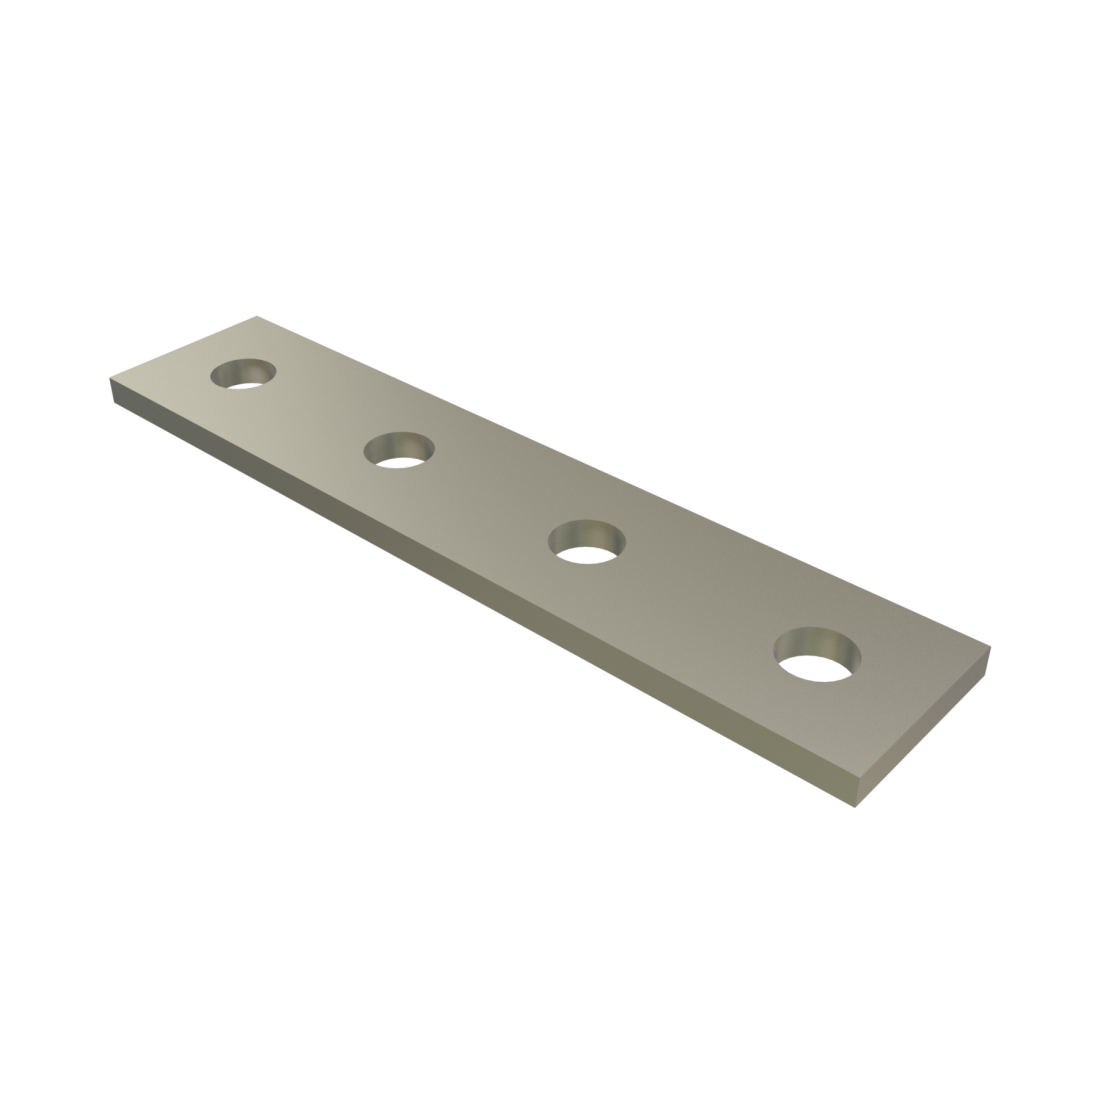 Stainless Steel 4-Hole Splice Plates